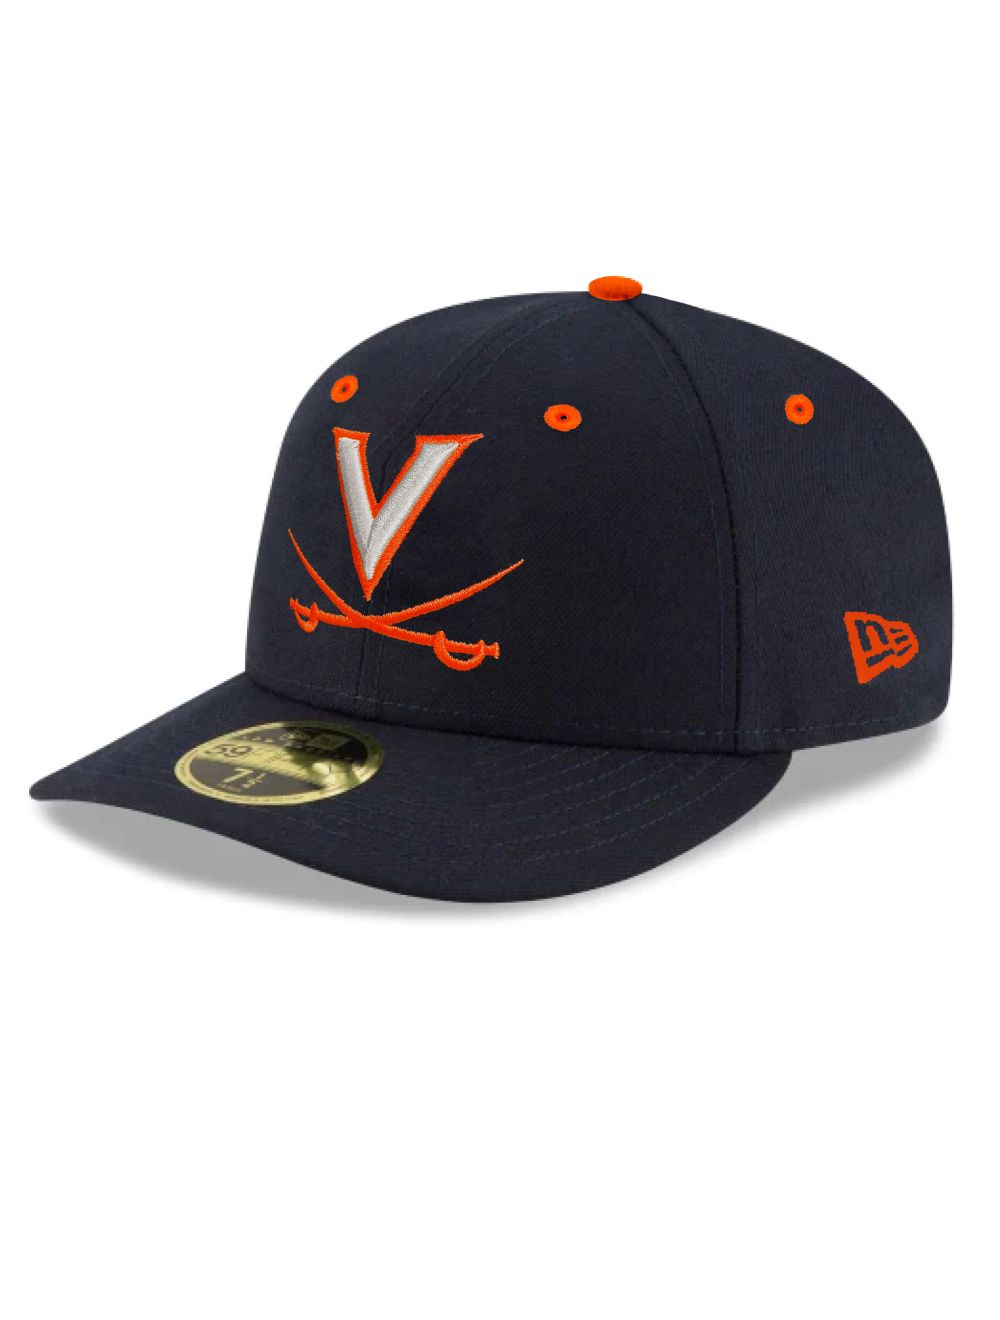 New Era 59FIFTY LP Navy Hat - Mincer's of Charlottesville